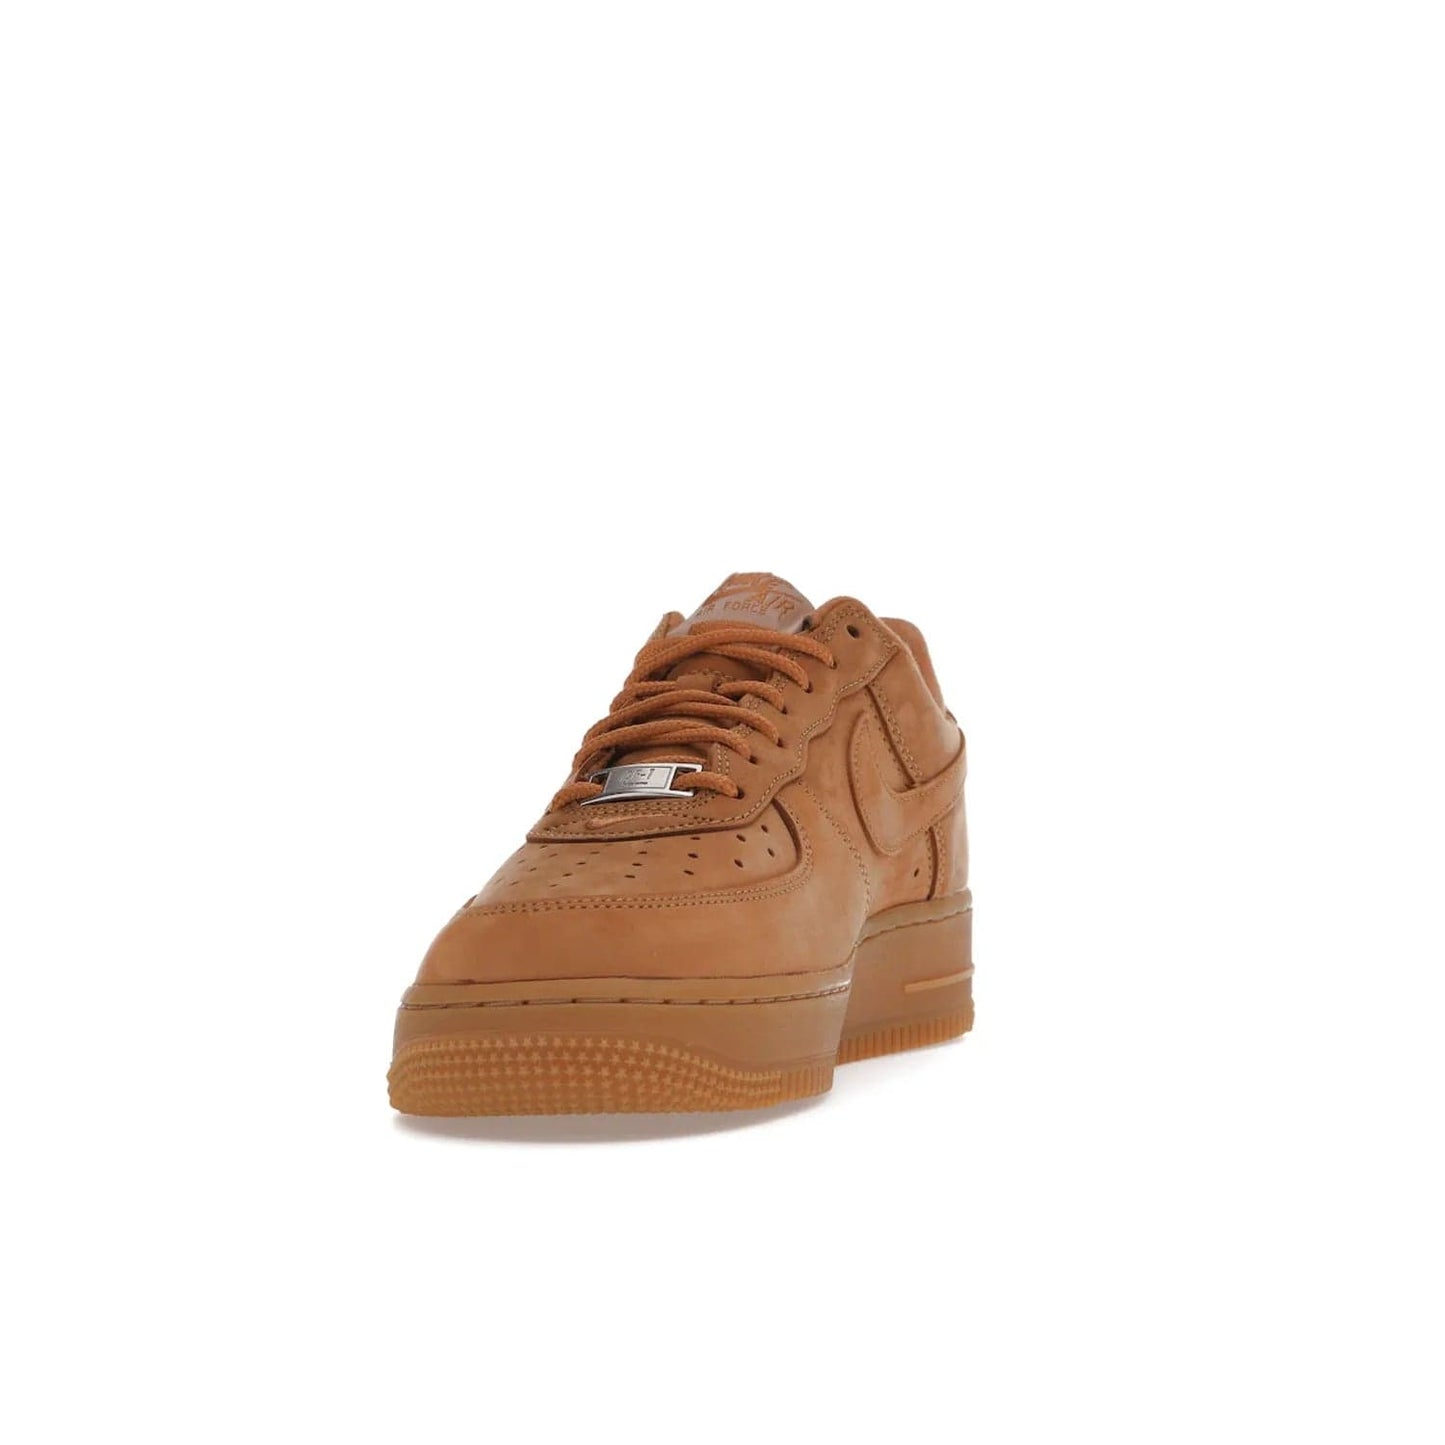 Nike Air Force 1 Low SP Supreme Wheat - Image 12 - Only at www.BallersClubKickz.com - A luxe Flax Durabuck upper and Supreme Box Logo insignias on the lateral heels make the Nike Air Force 1 Low SP Supreme Wheat a stylish lifestyle shoe. Matching Flax Air sole adds a classic touch to this collaboration between Nike and Supreme. Make a statement with this edition of the classic Air Force 1 Low.